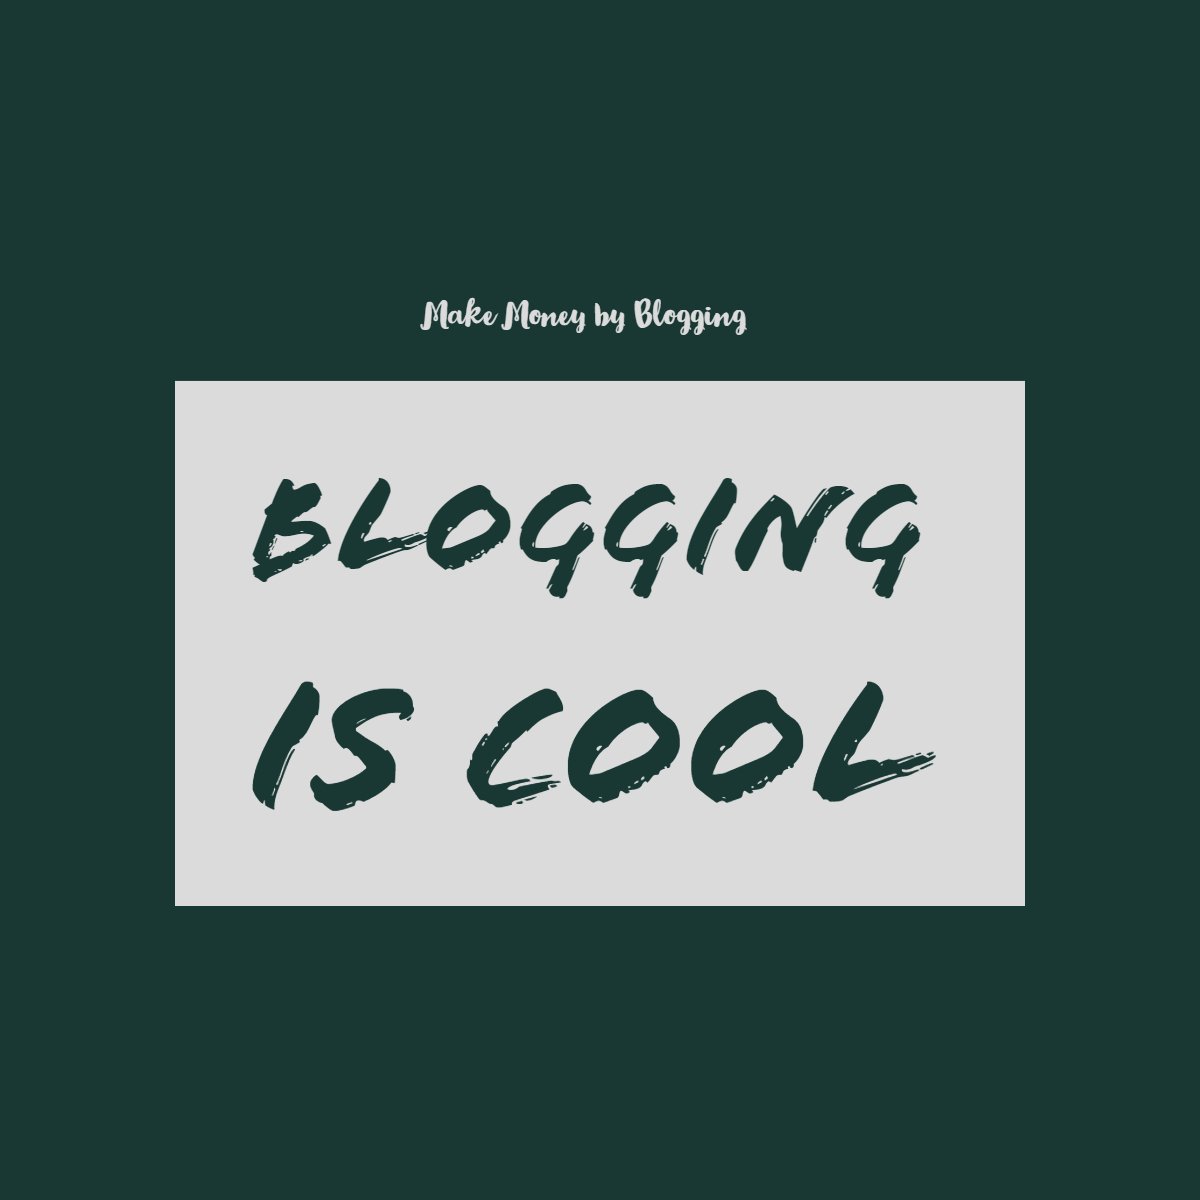 Bloggingiscool.com 20 reasons why people might not read your blog post